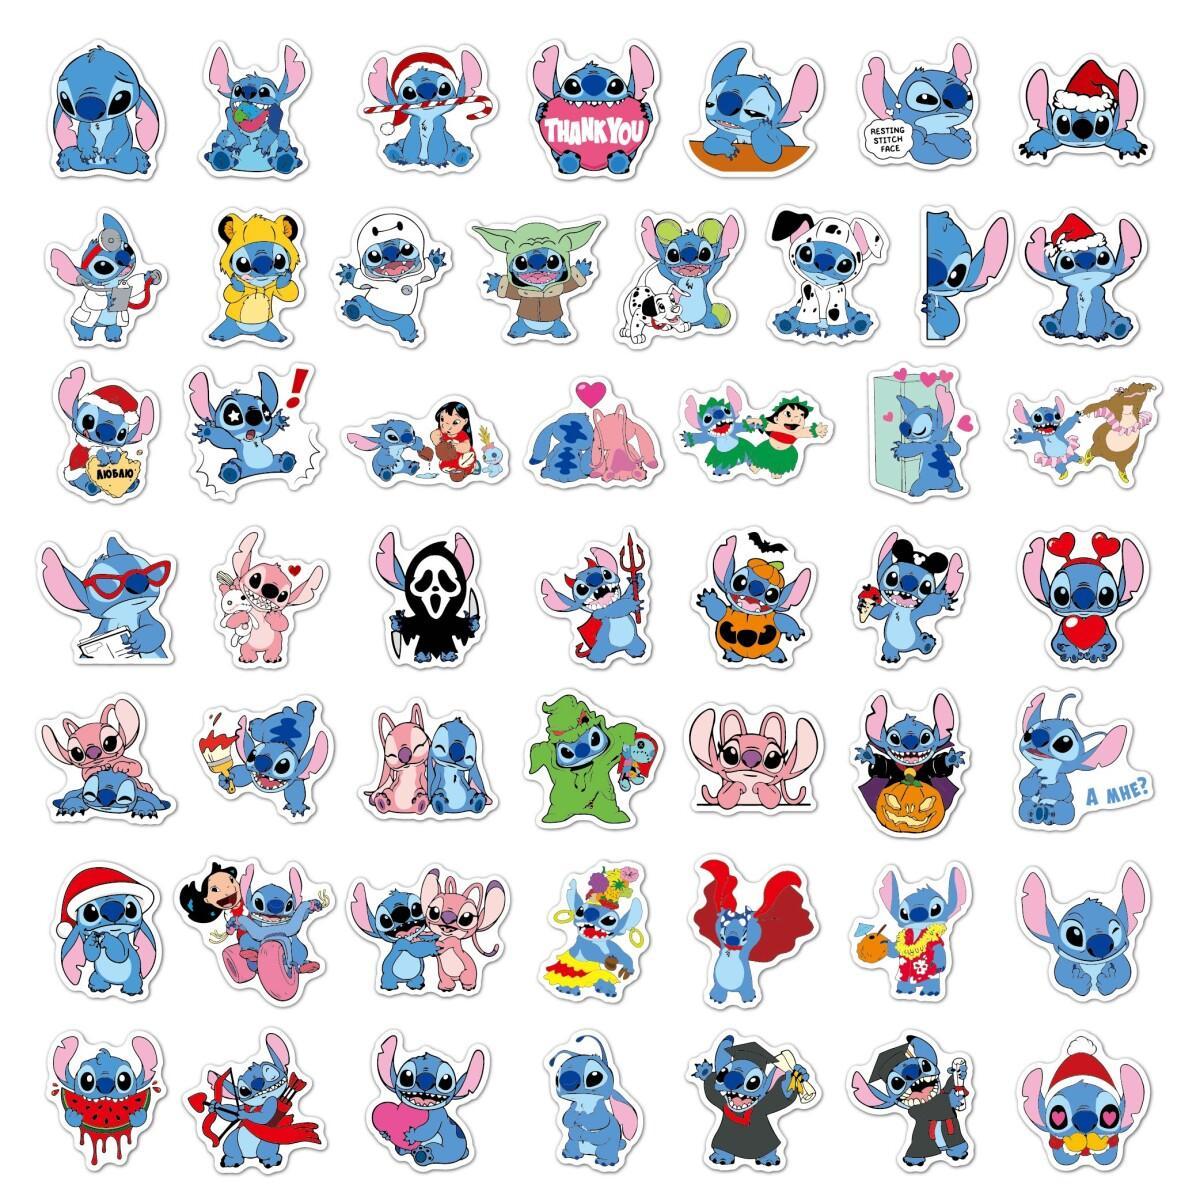 Disney Lilo and Stitch Decals - Set of 9 Lilo and Stitch Stickers for Kids and Adults - Vinyl Decals for Laptop, Tumbler, Water Bottle, Vehicles 